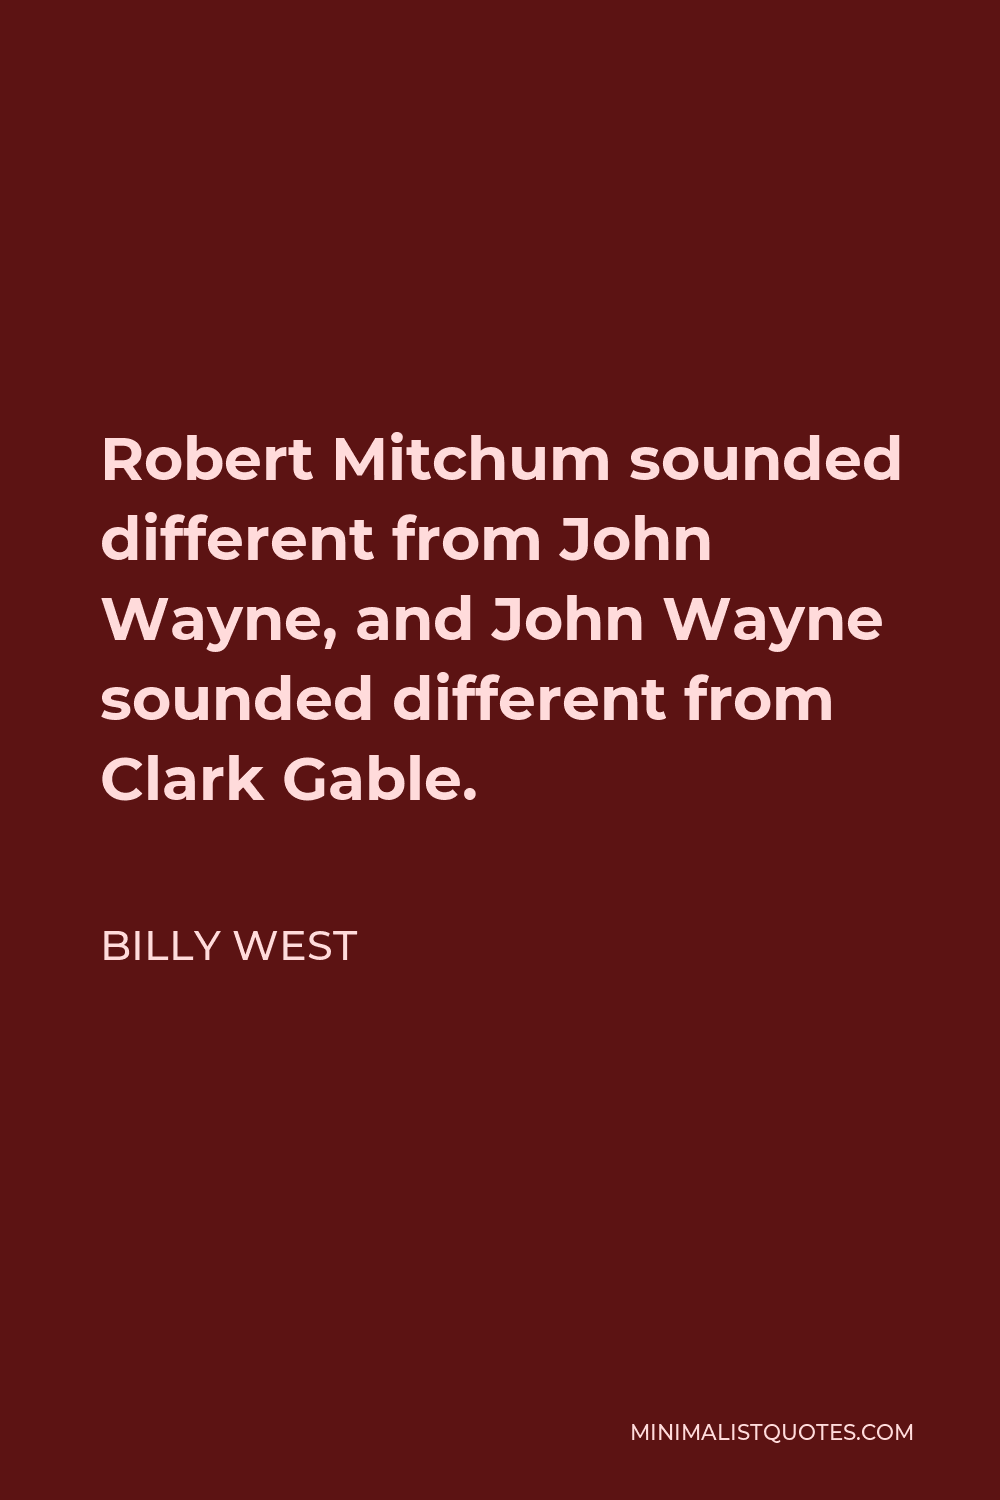 Billy West Quote - Robert Mitchum sounded different from John Wayne, and John Wayne sounded different from Clark Gable.